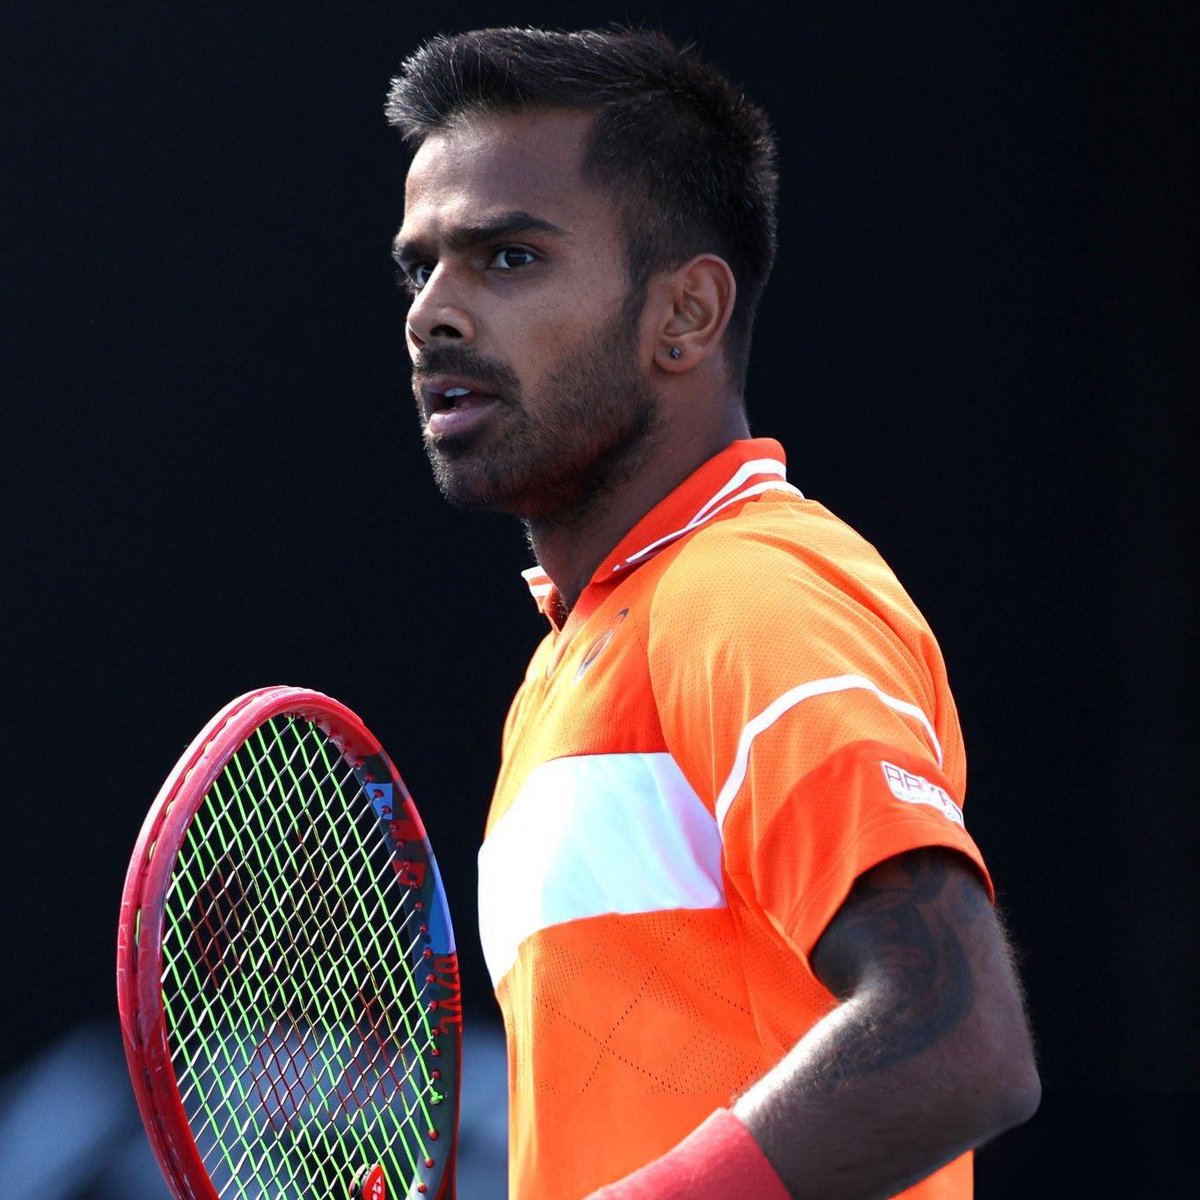 Sumit Nagal memorable Australian Open campaign came to an end in 2nd round after defeat against J Shang Nagal won 1st set vs former junior world no.1 Shang #AusOpen #AO24 #SumitNagal